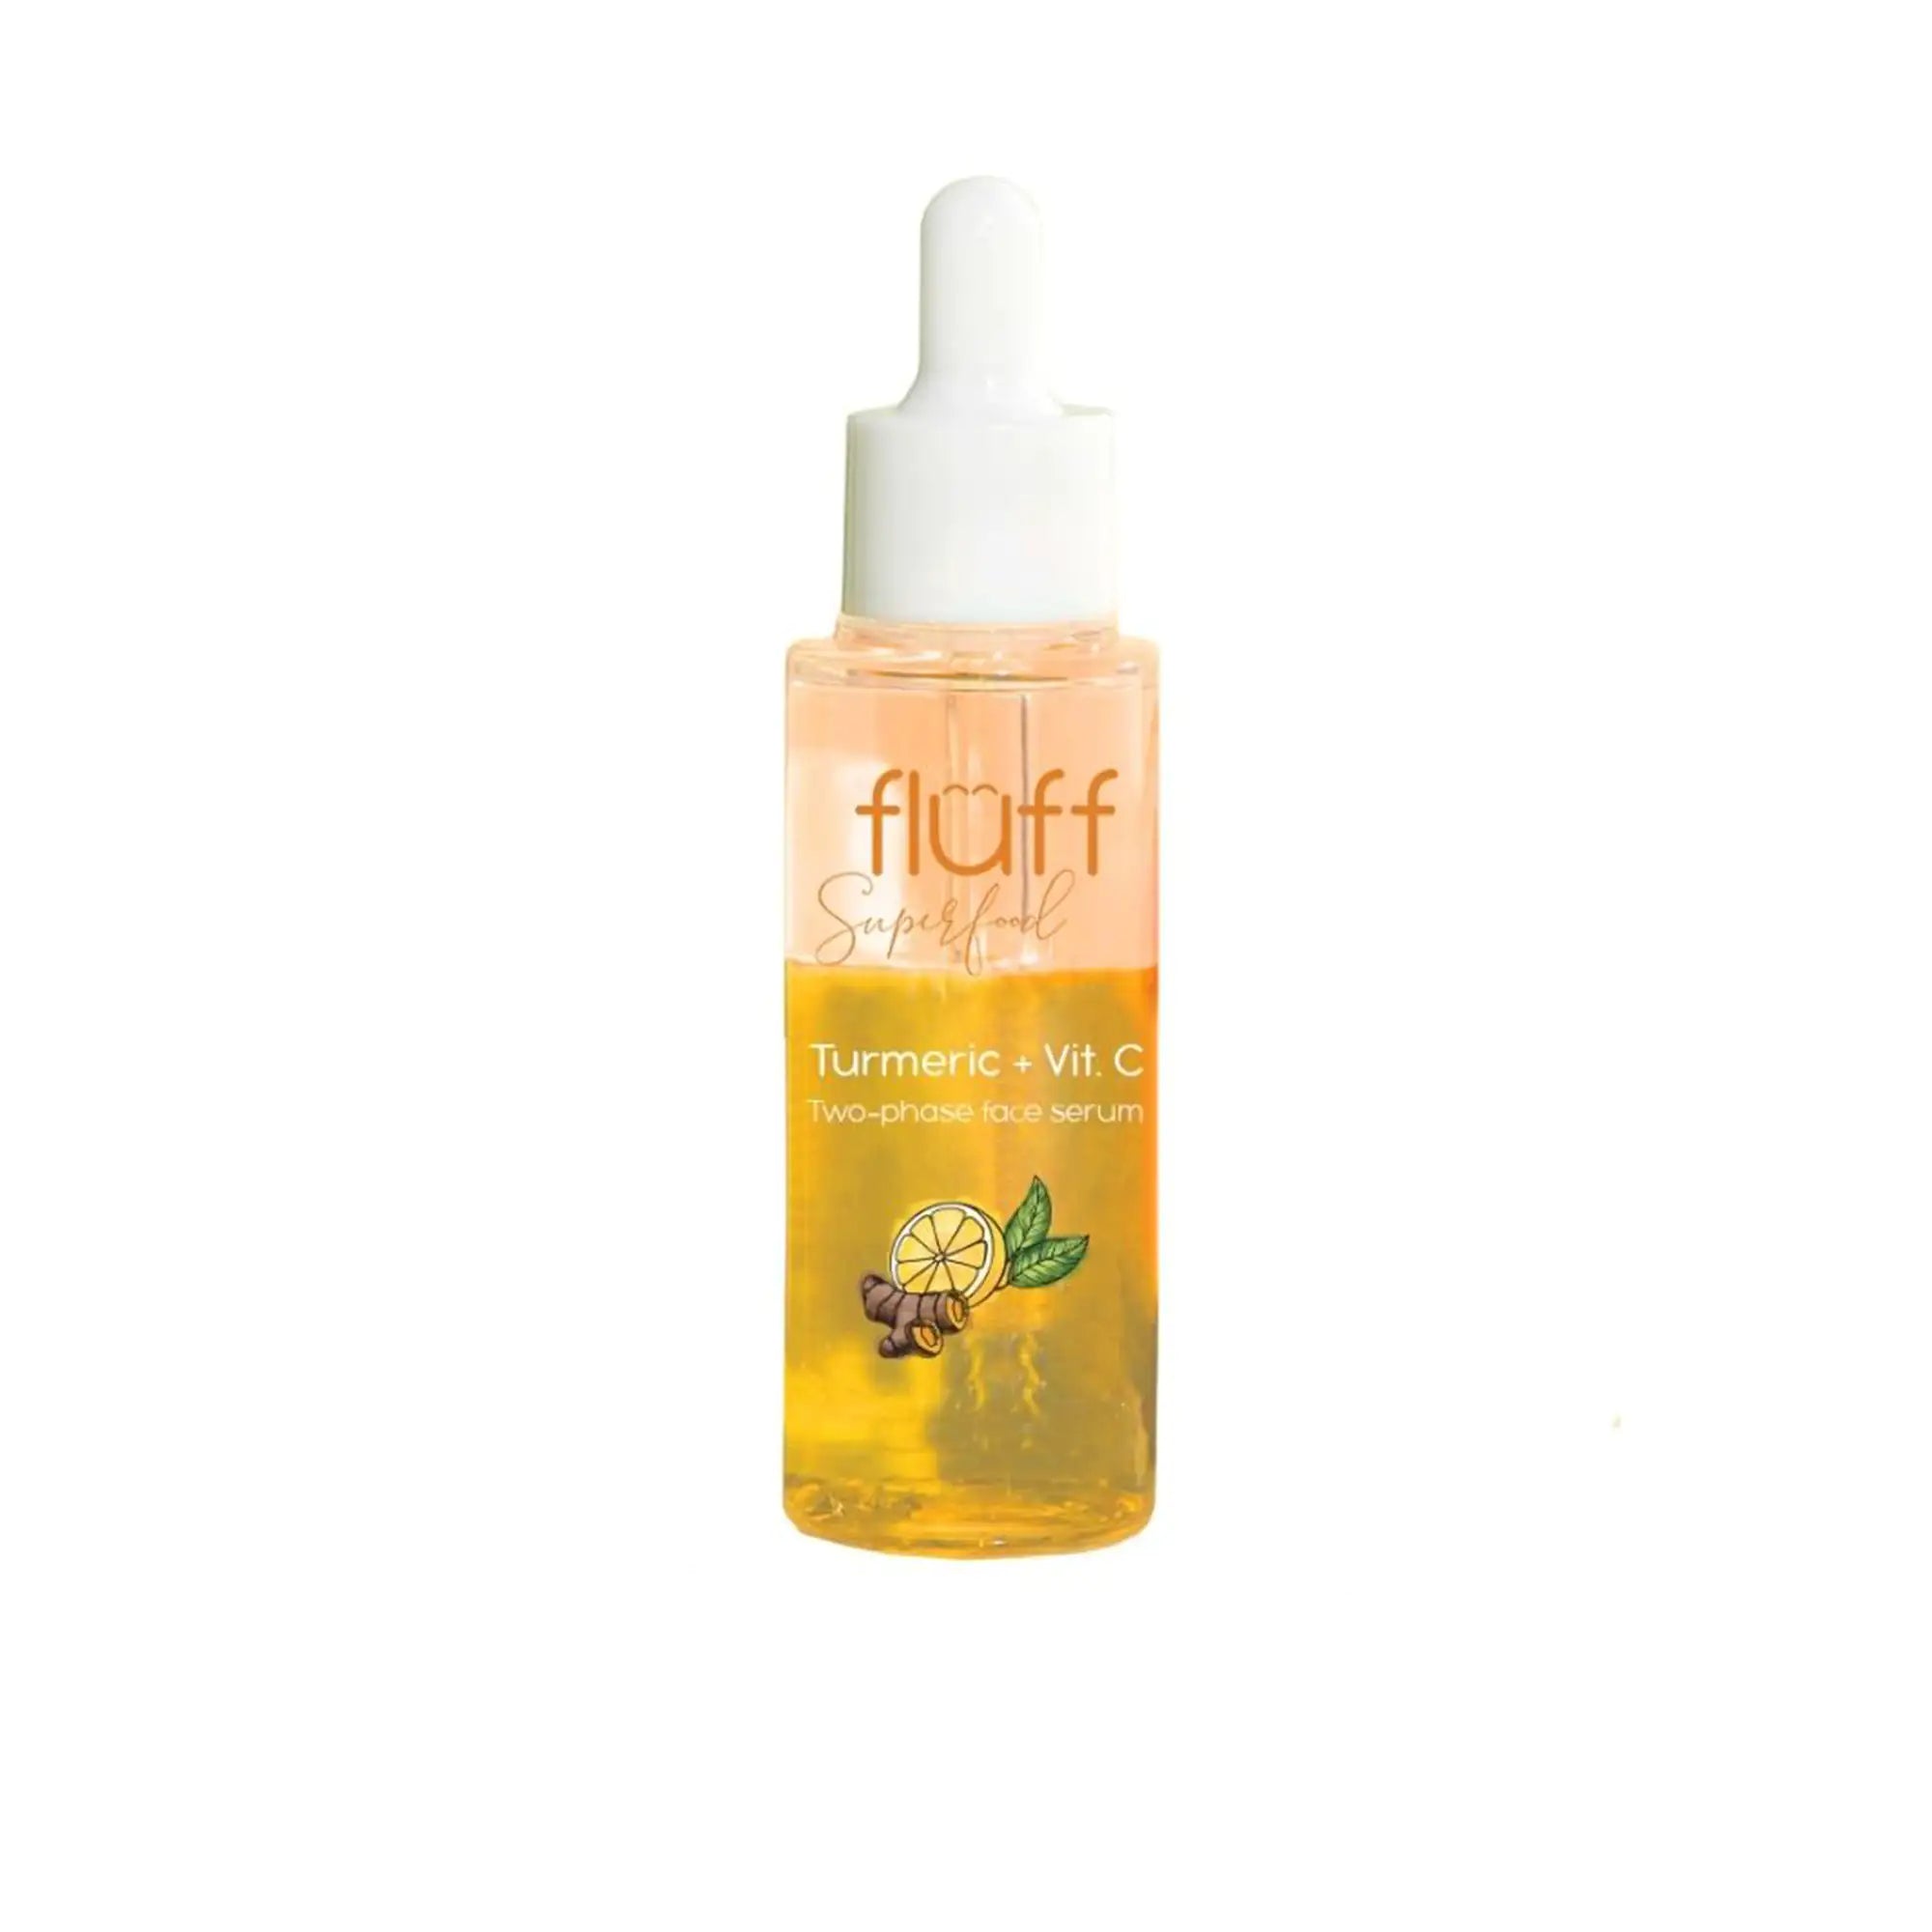 Fluff Turmeric and Vitamin C Booster / Two-phase Face Serum, 40ml